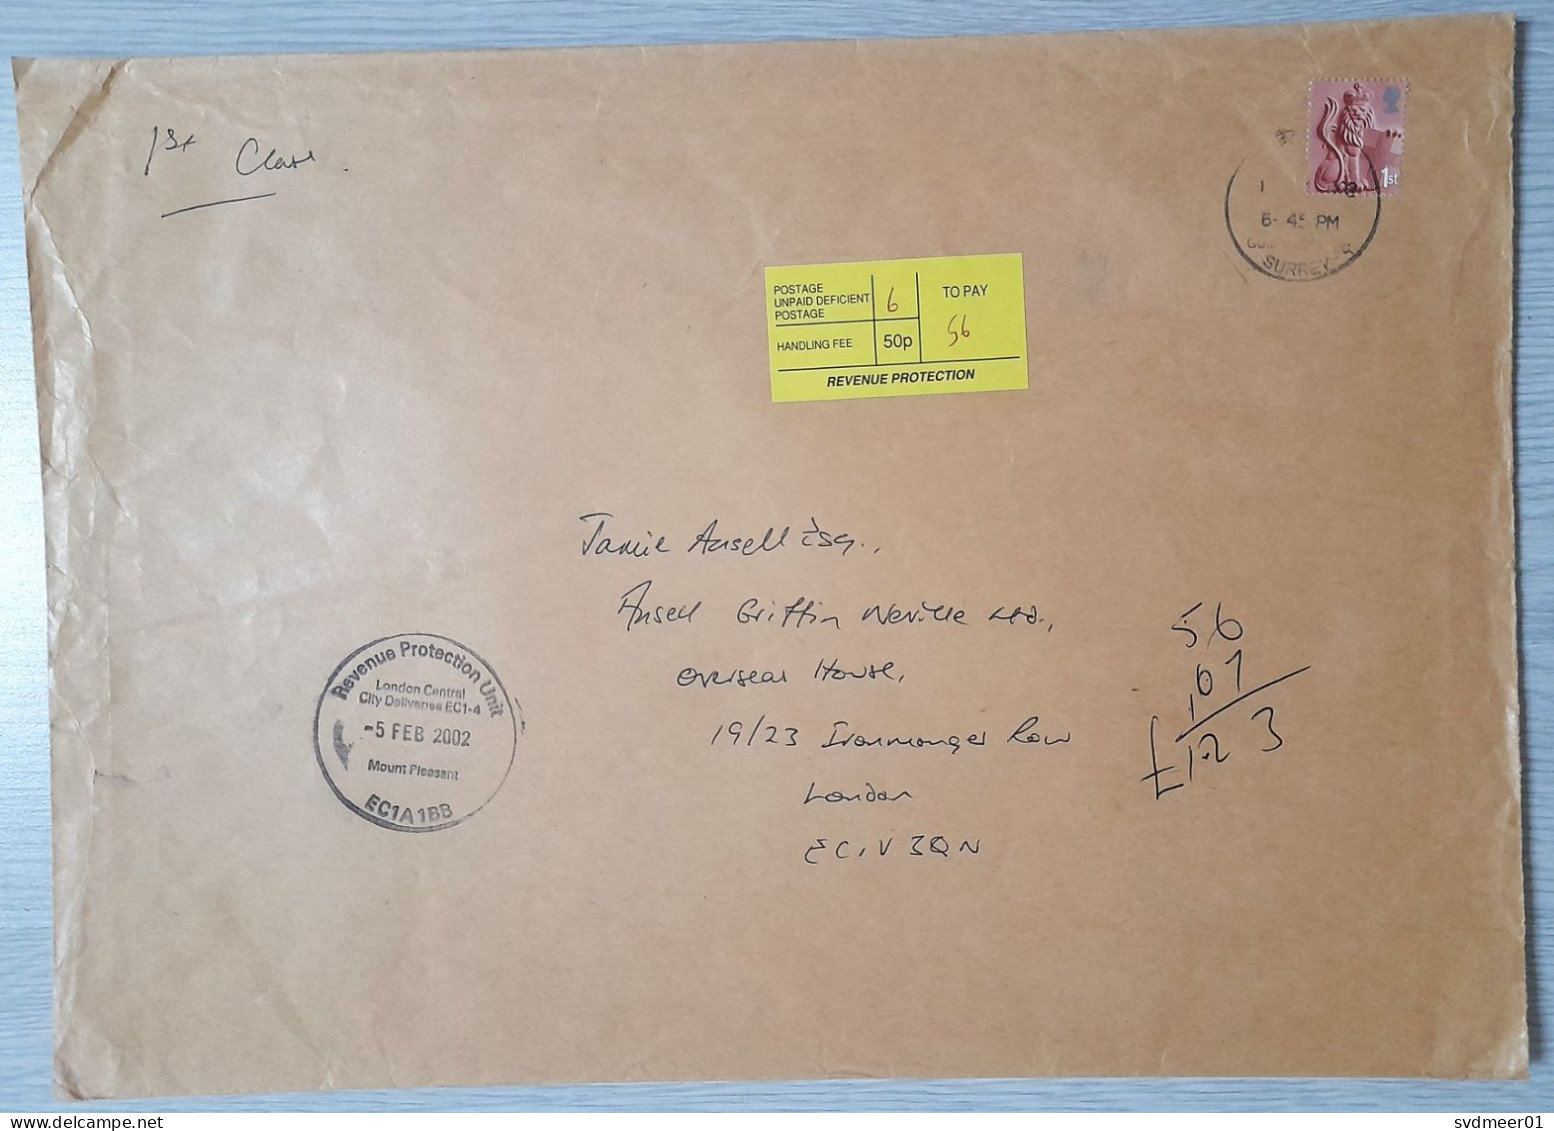 UK: Large Cover, 2002, 1 Stamp, Heraldry, Label & Cancel To Pay, Postage Due, Taxed, Revenue Protection (minor Creases) - Briefe U. Dokumente